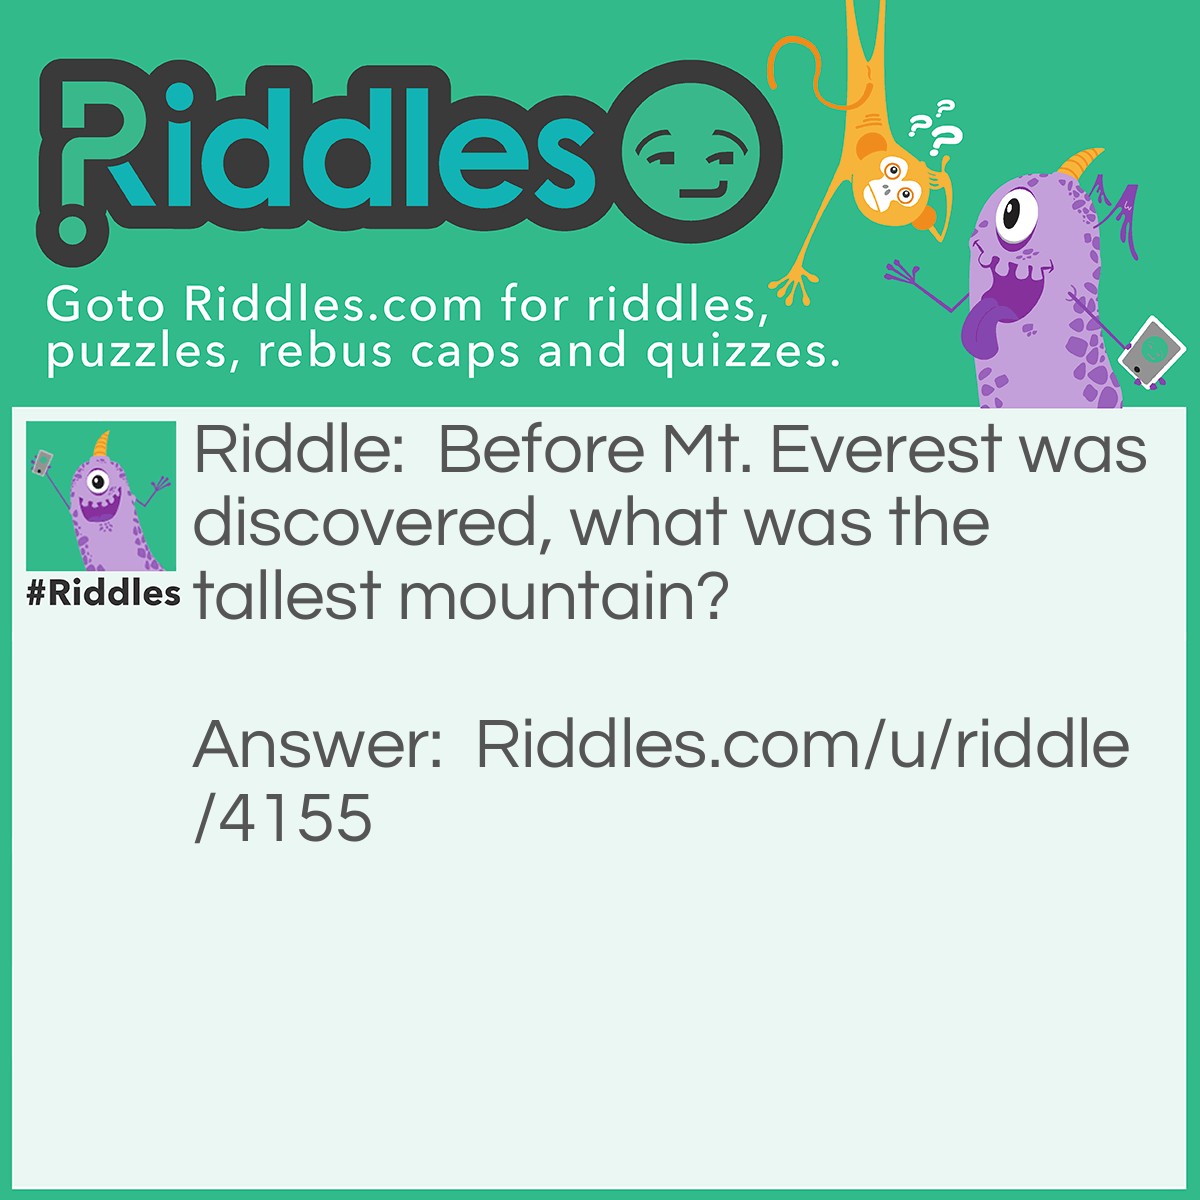 Riddle: Before Mt. Everest was discovered, what was the tallest mountain? Answer: Mt. Everest because it was still there it just wasn't discovered.